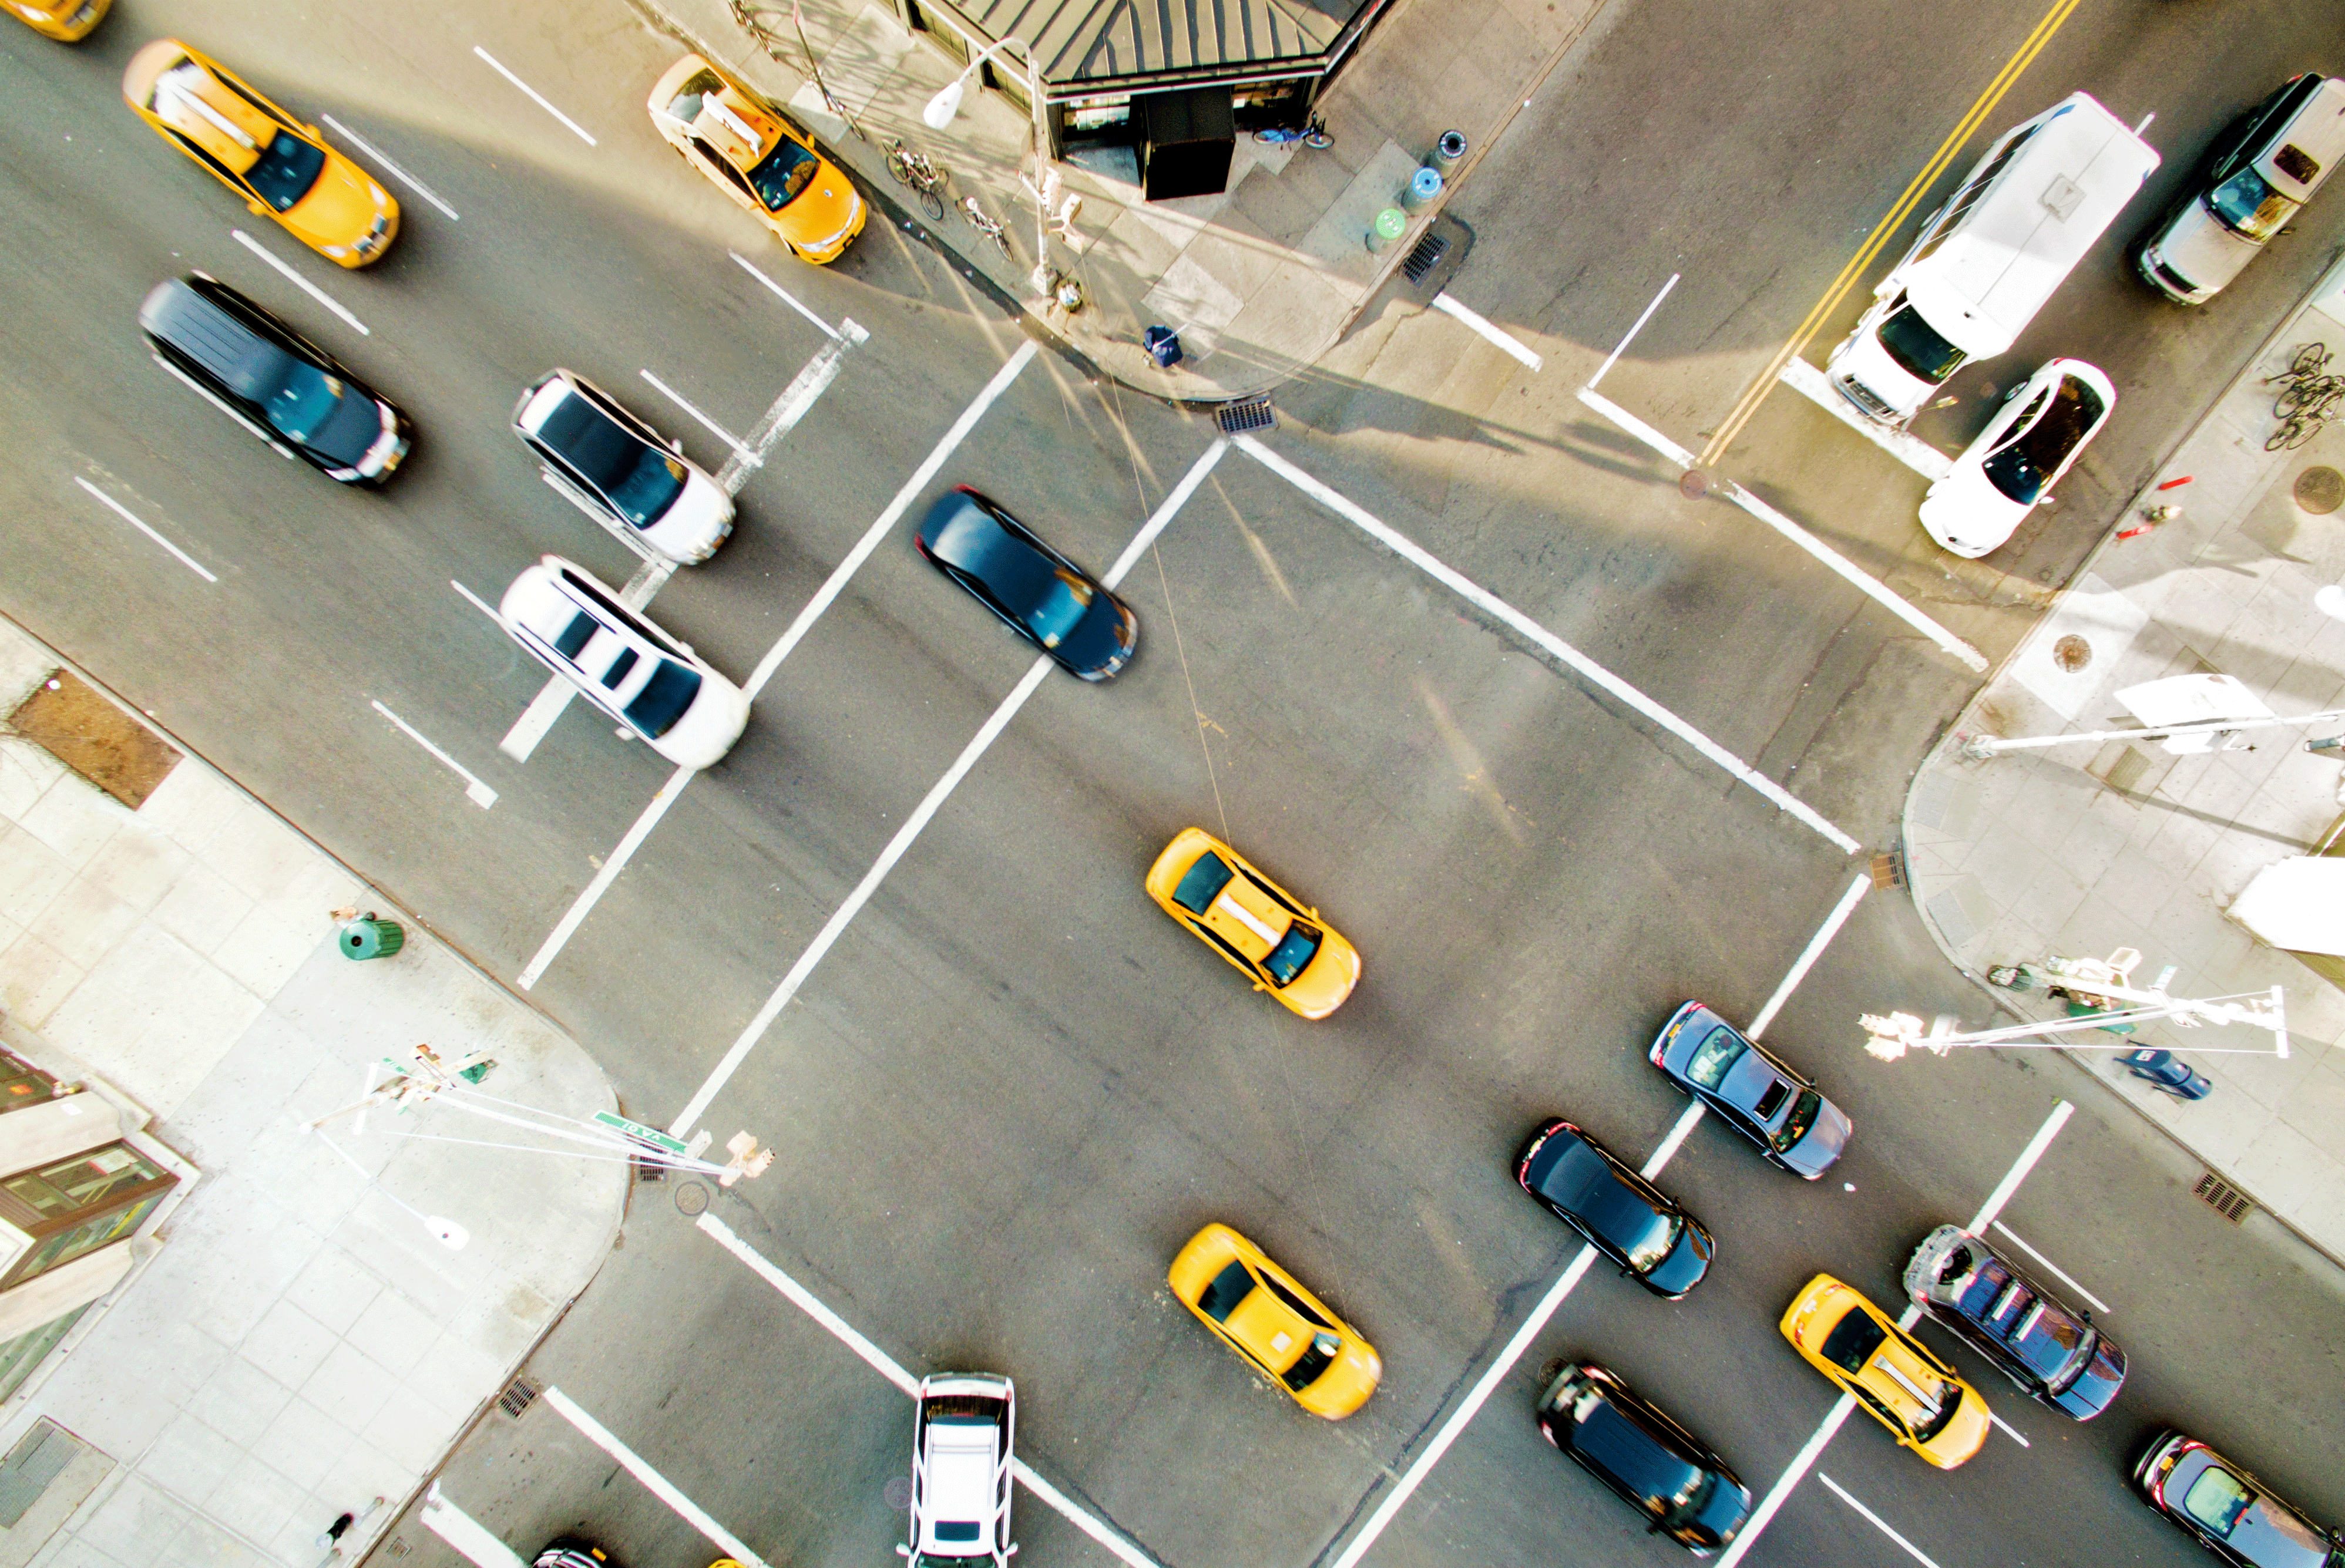 View of four way stop with traffic from above. There are white, black and yellow cars. There are traffic lights on two of the corners. Green street signs are on traffic light poles.